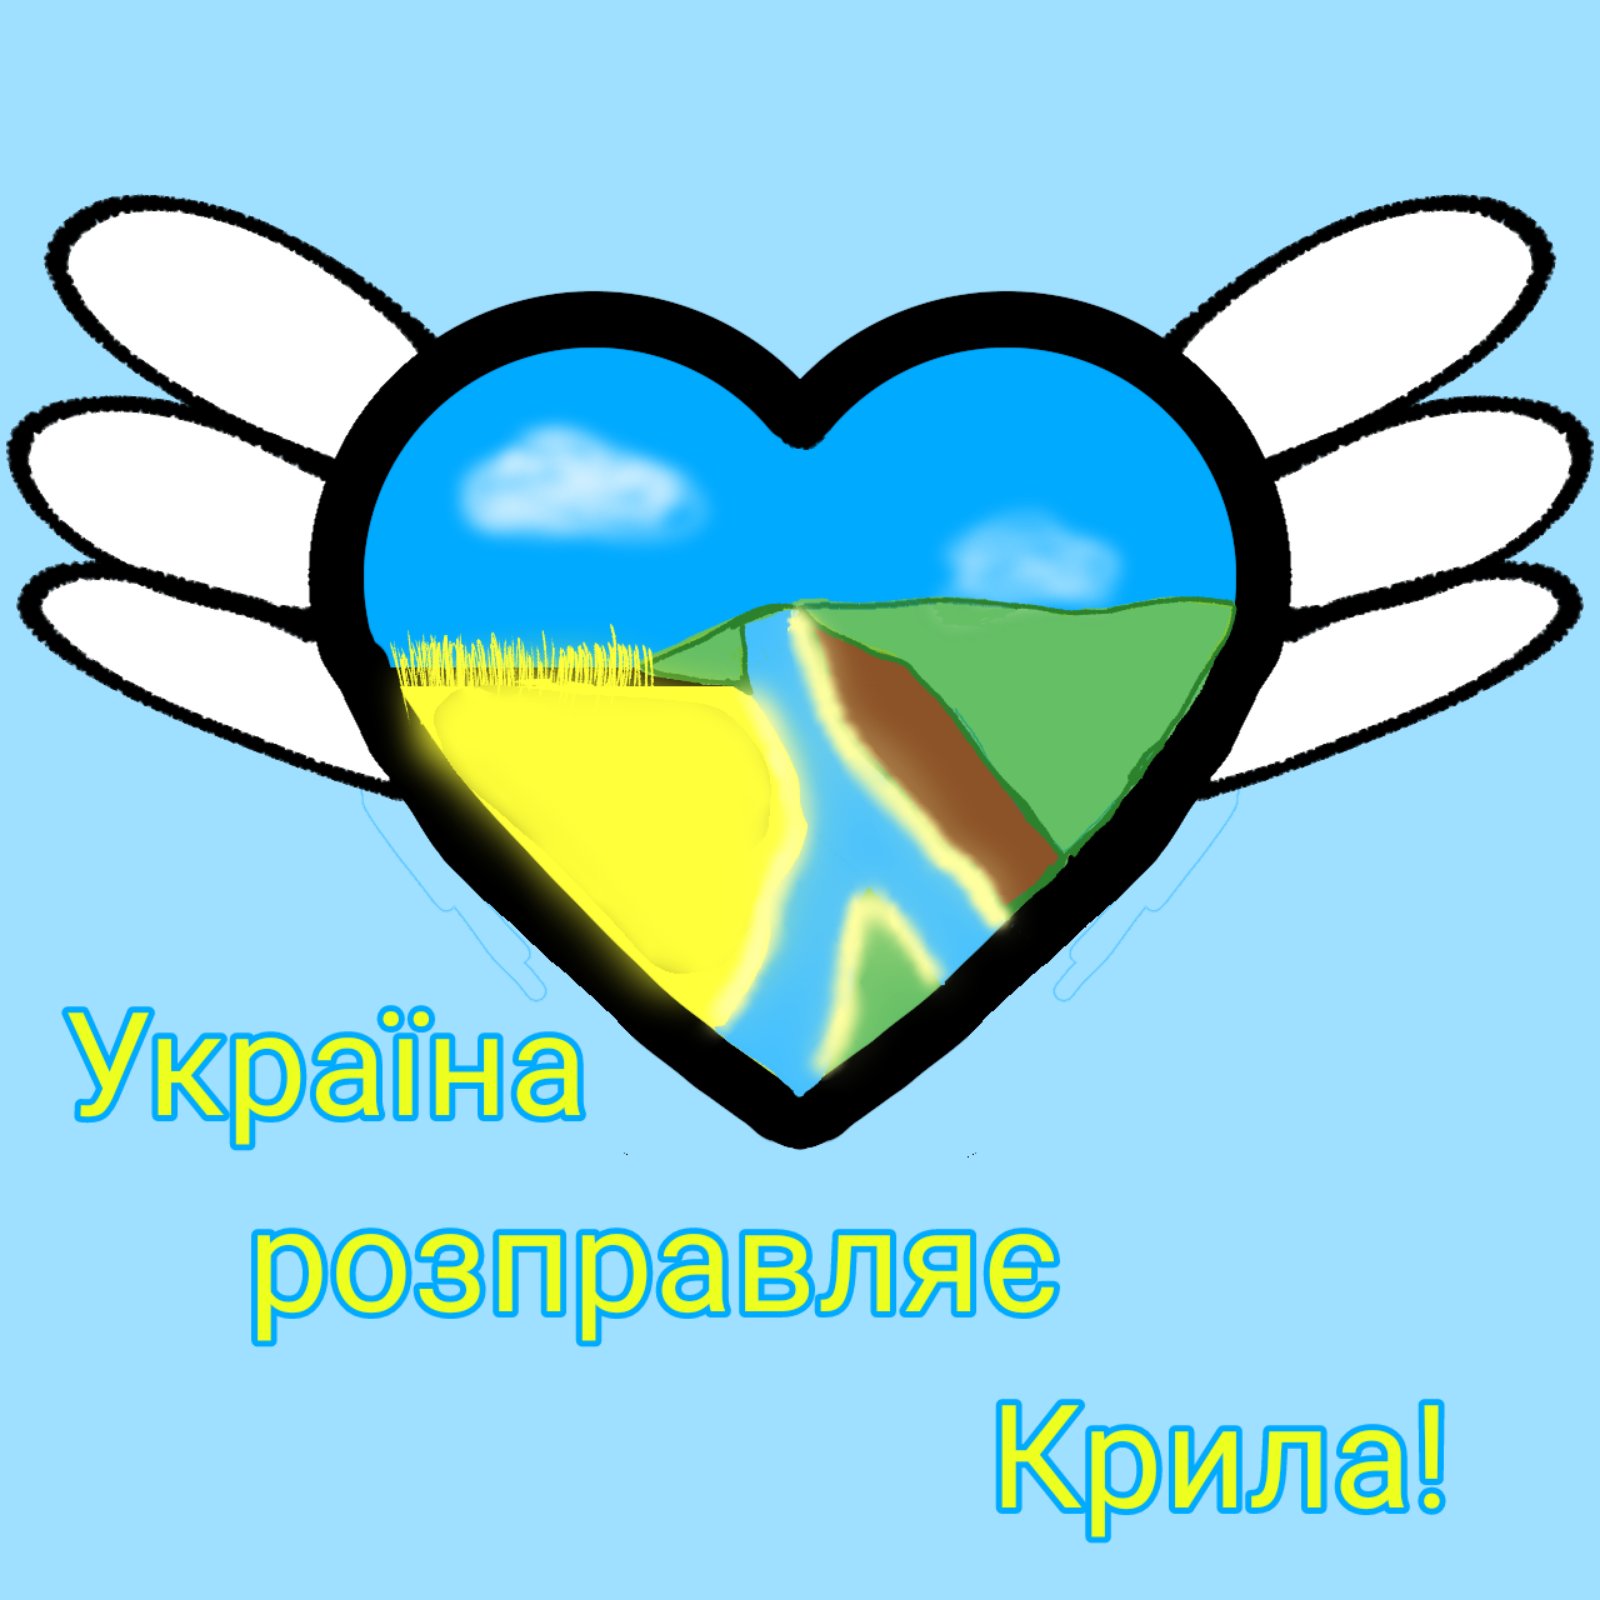 Ukraine spreads its wings, by Ira, 10 y.o